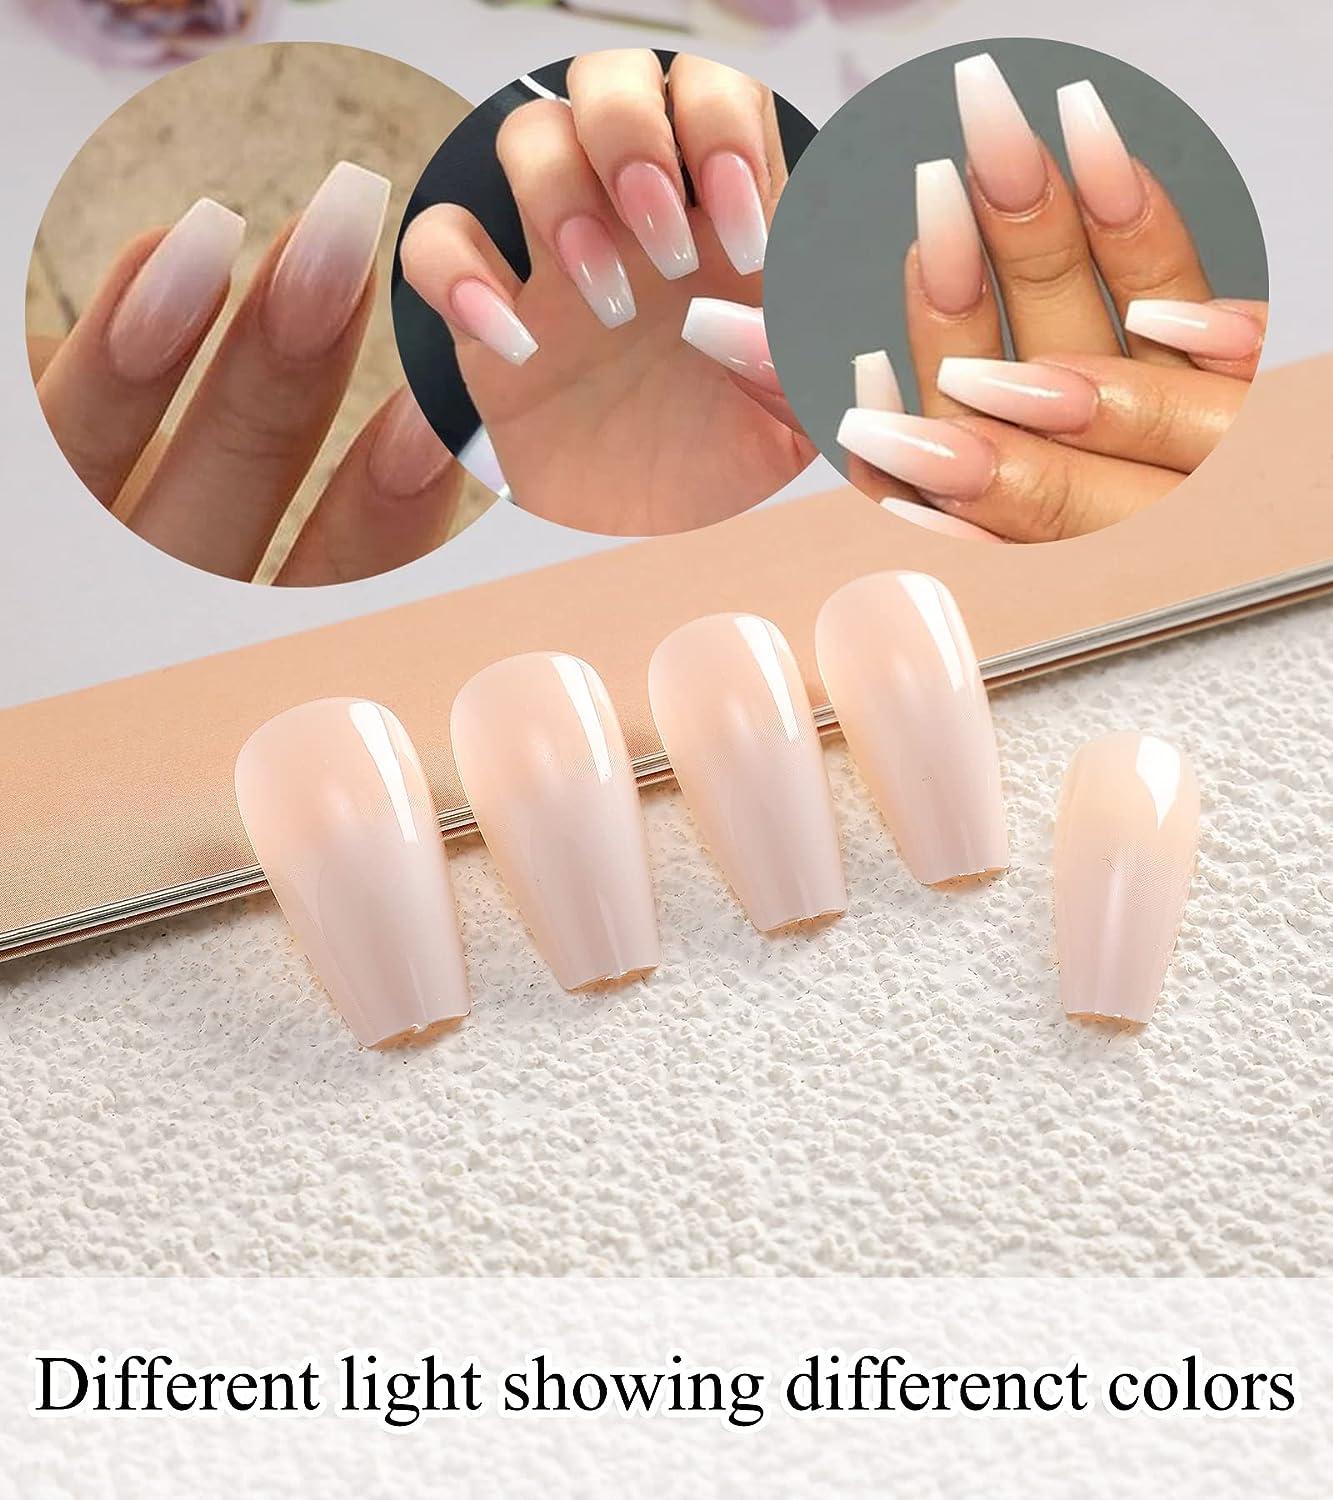  Coffin Press on Nails 3 Packs (72pcs) Fake Nail Glossy False  Nails with Designs French Summer Beach Nails Art Tips Sets Full Cover for  Press ons Finger Manicure for Women and